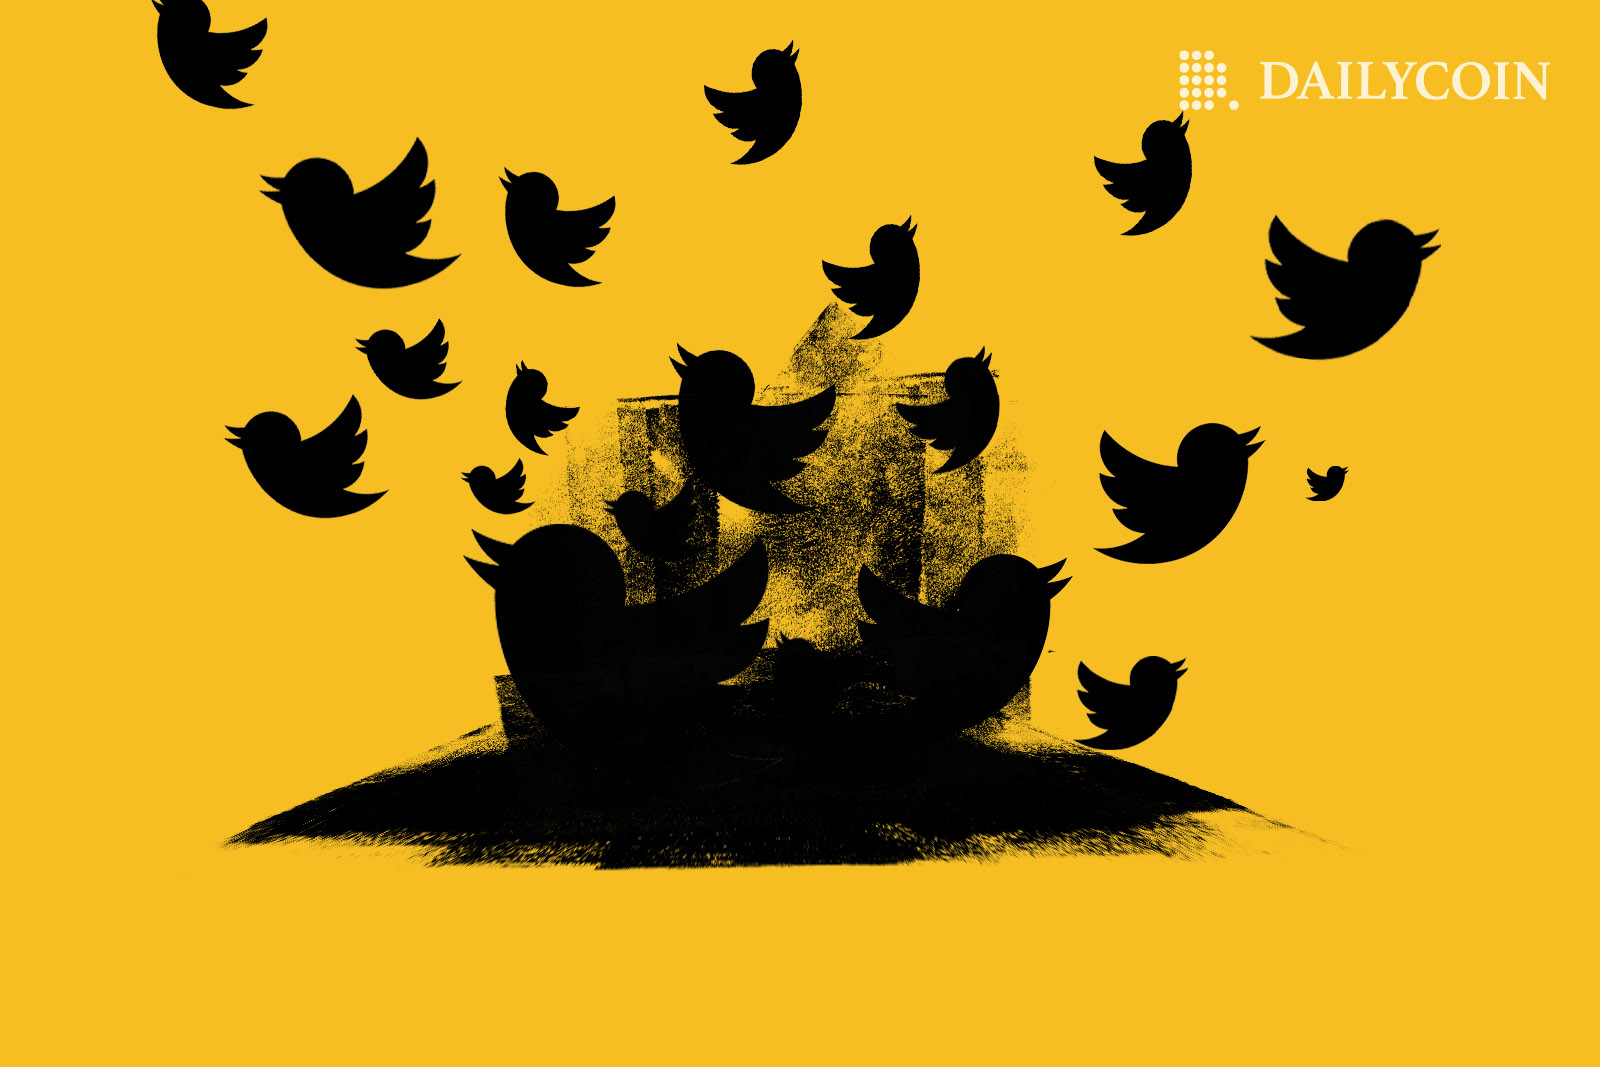 A black silhouette of Twitter logo on yellow background